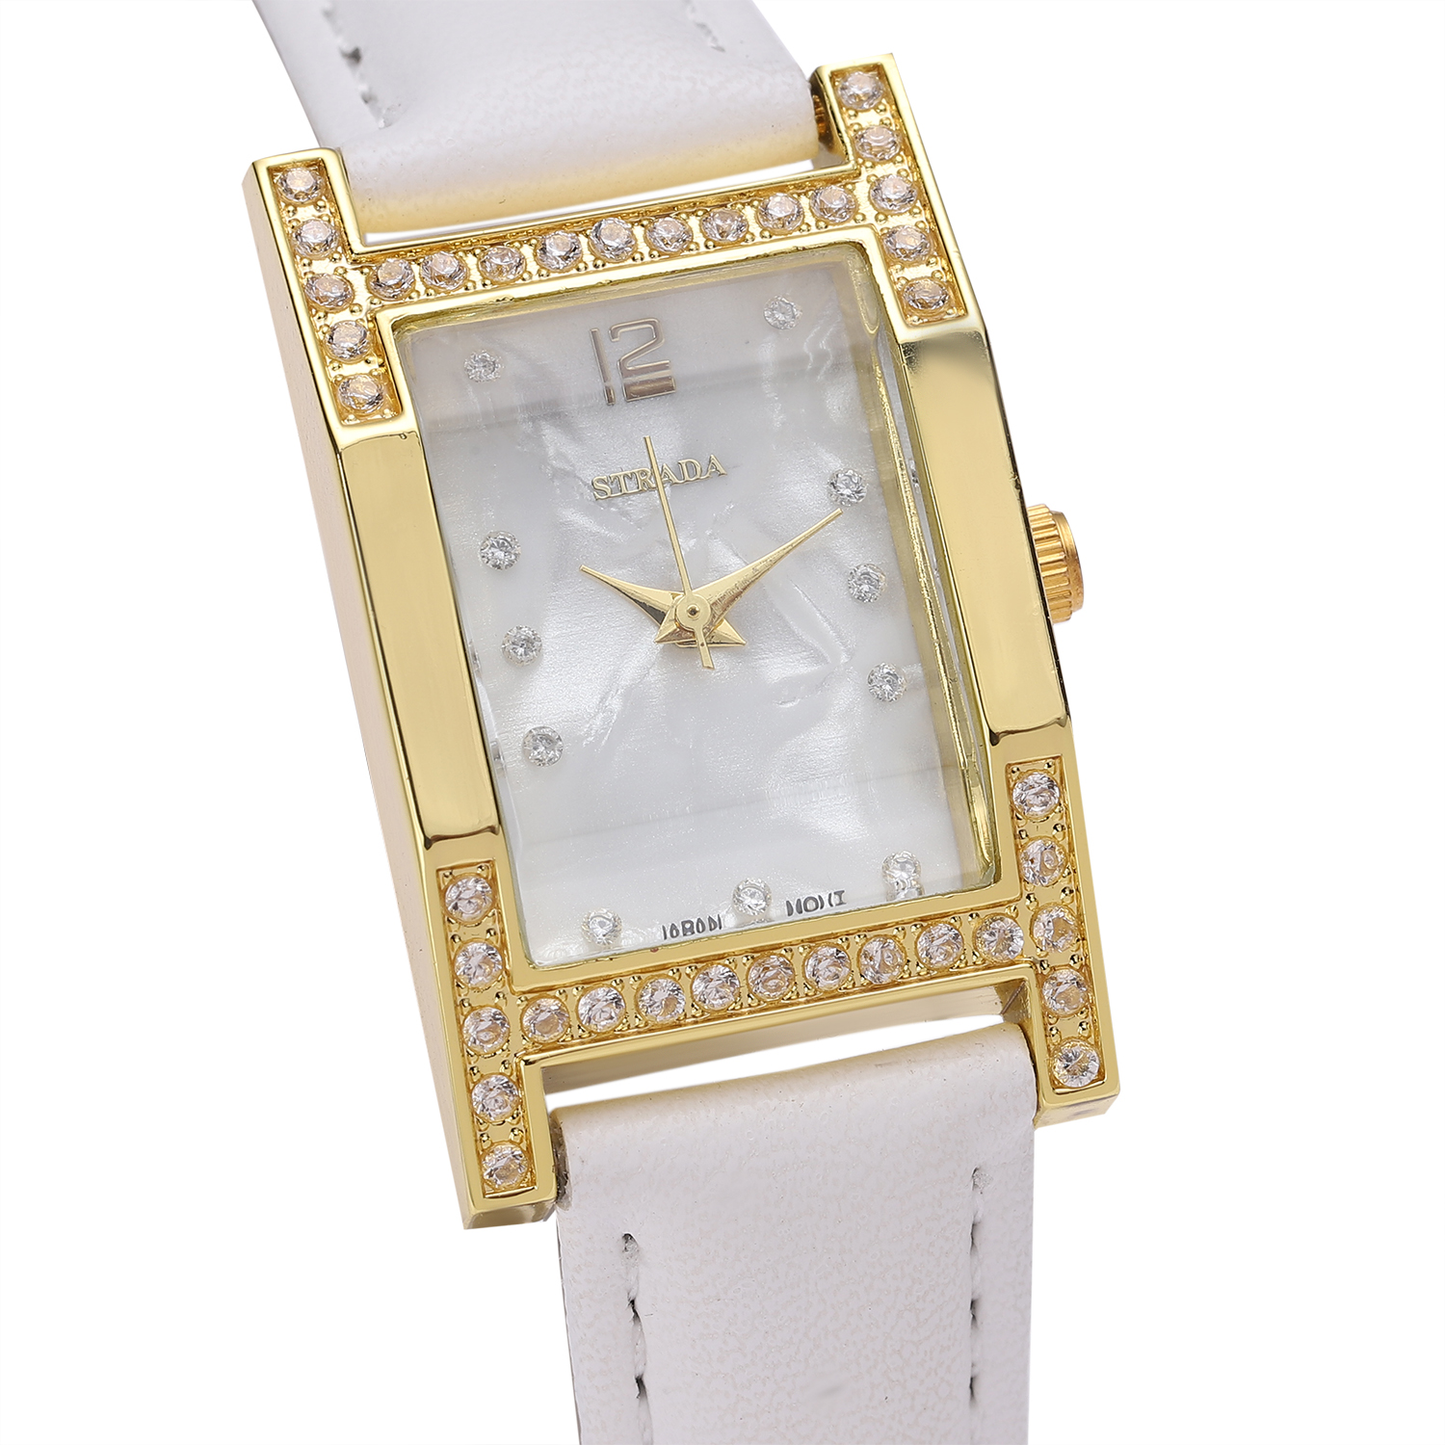 Simulated Diamond Watch with White Vegan Leather Strap